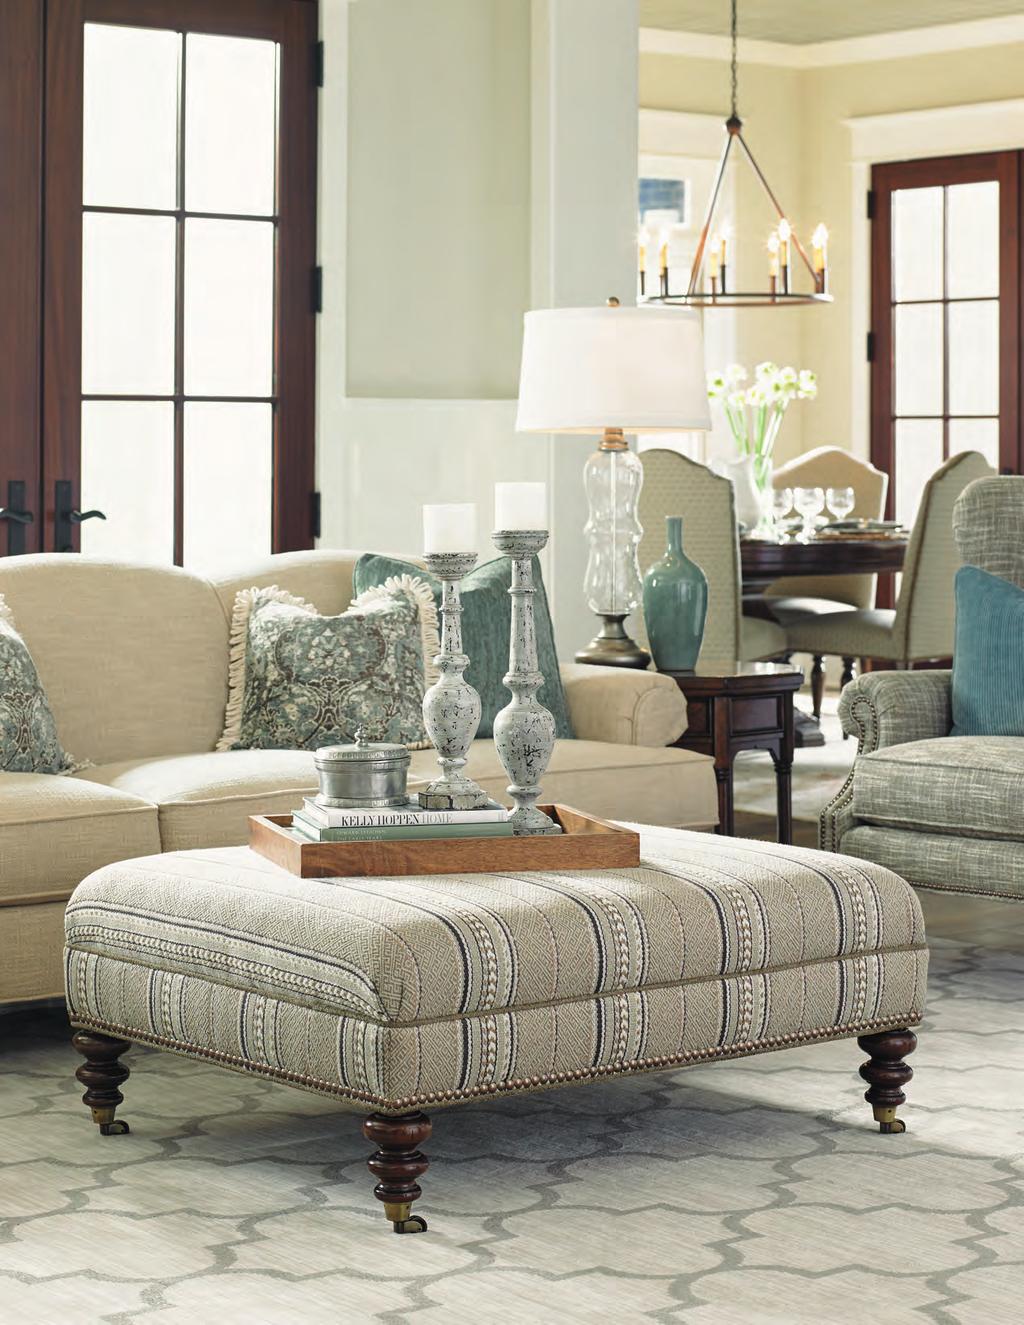 In the style of country manor living, Coventry Hills blends new traditional design with a gently distressed, hand-burnished artisan finish that evokes a sense of comfort and familiarity, reflecting